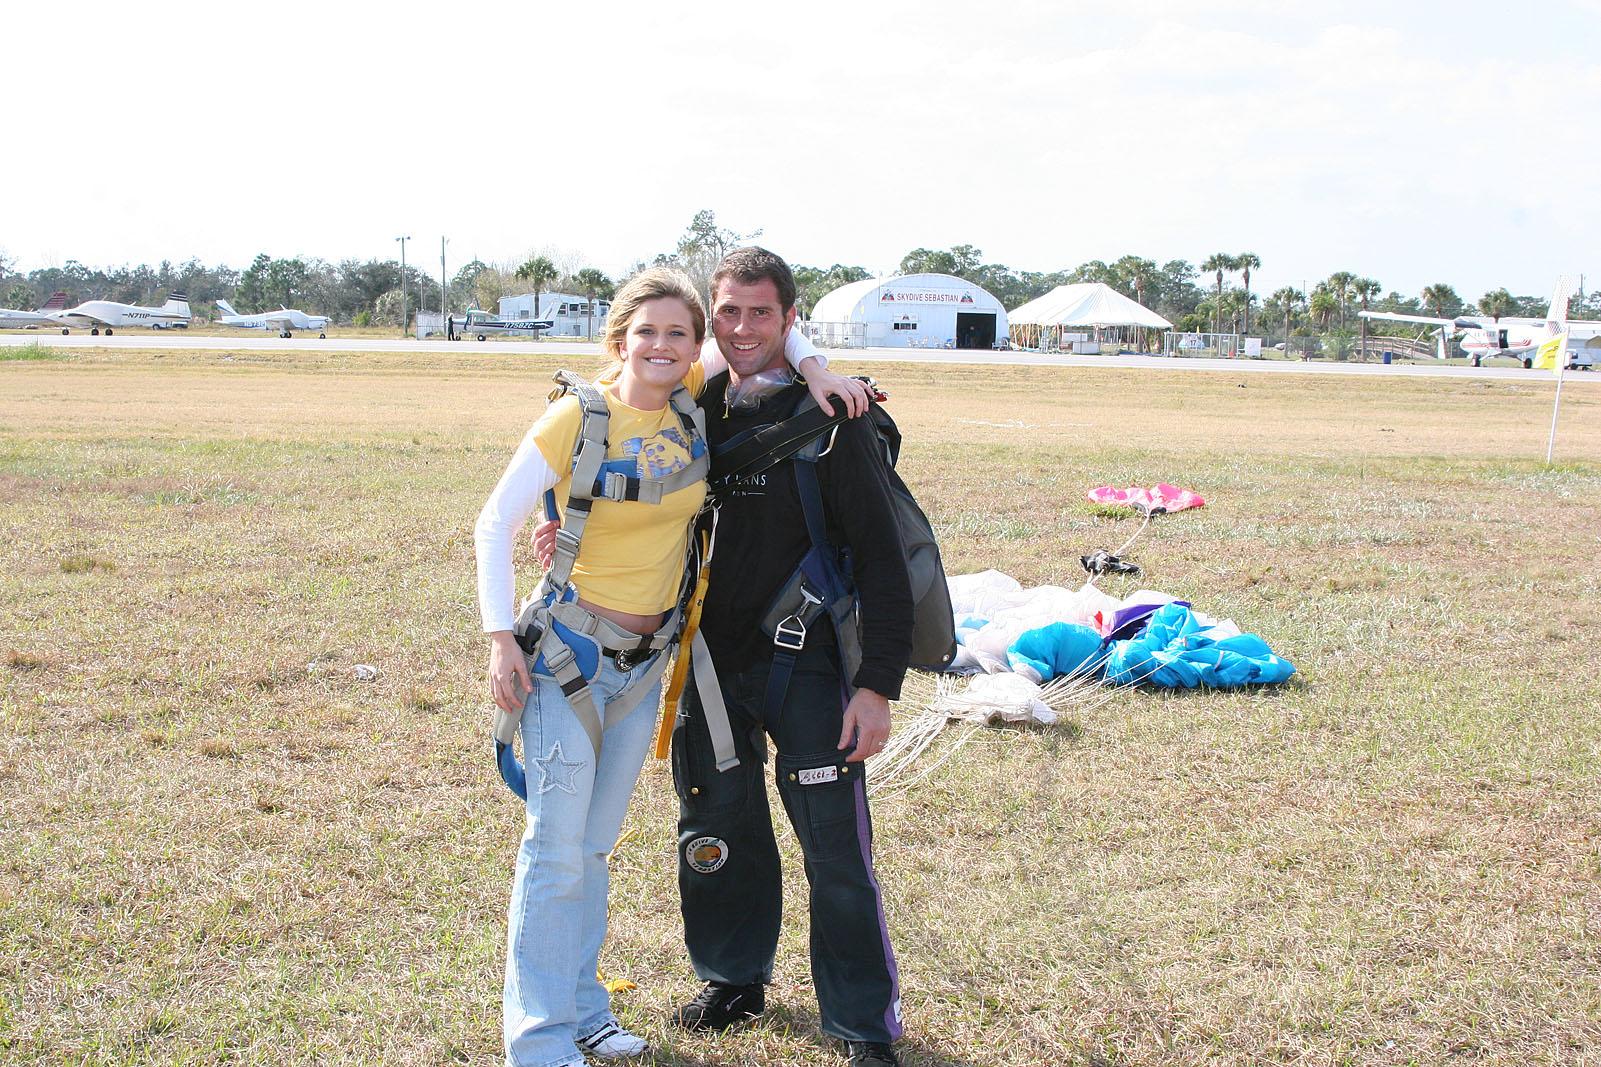 Pictures of Samantha Gauge and Brooke Skye going sky diving #53558291